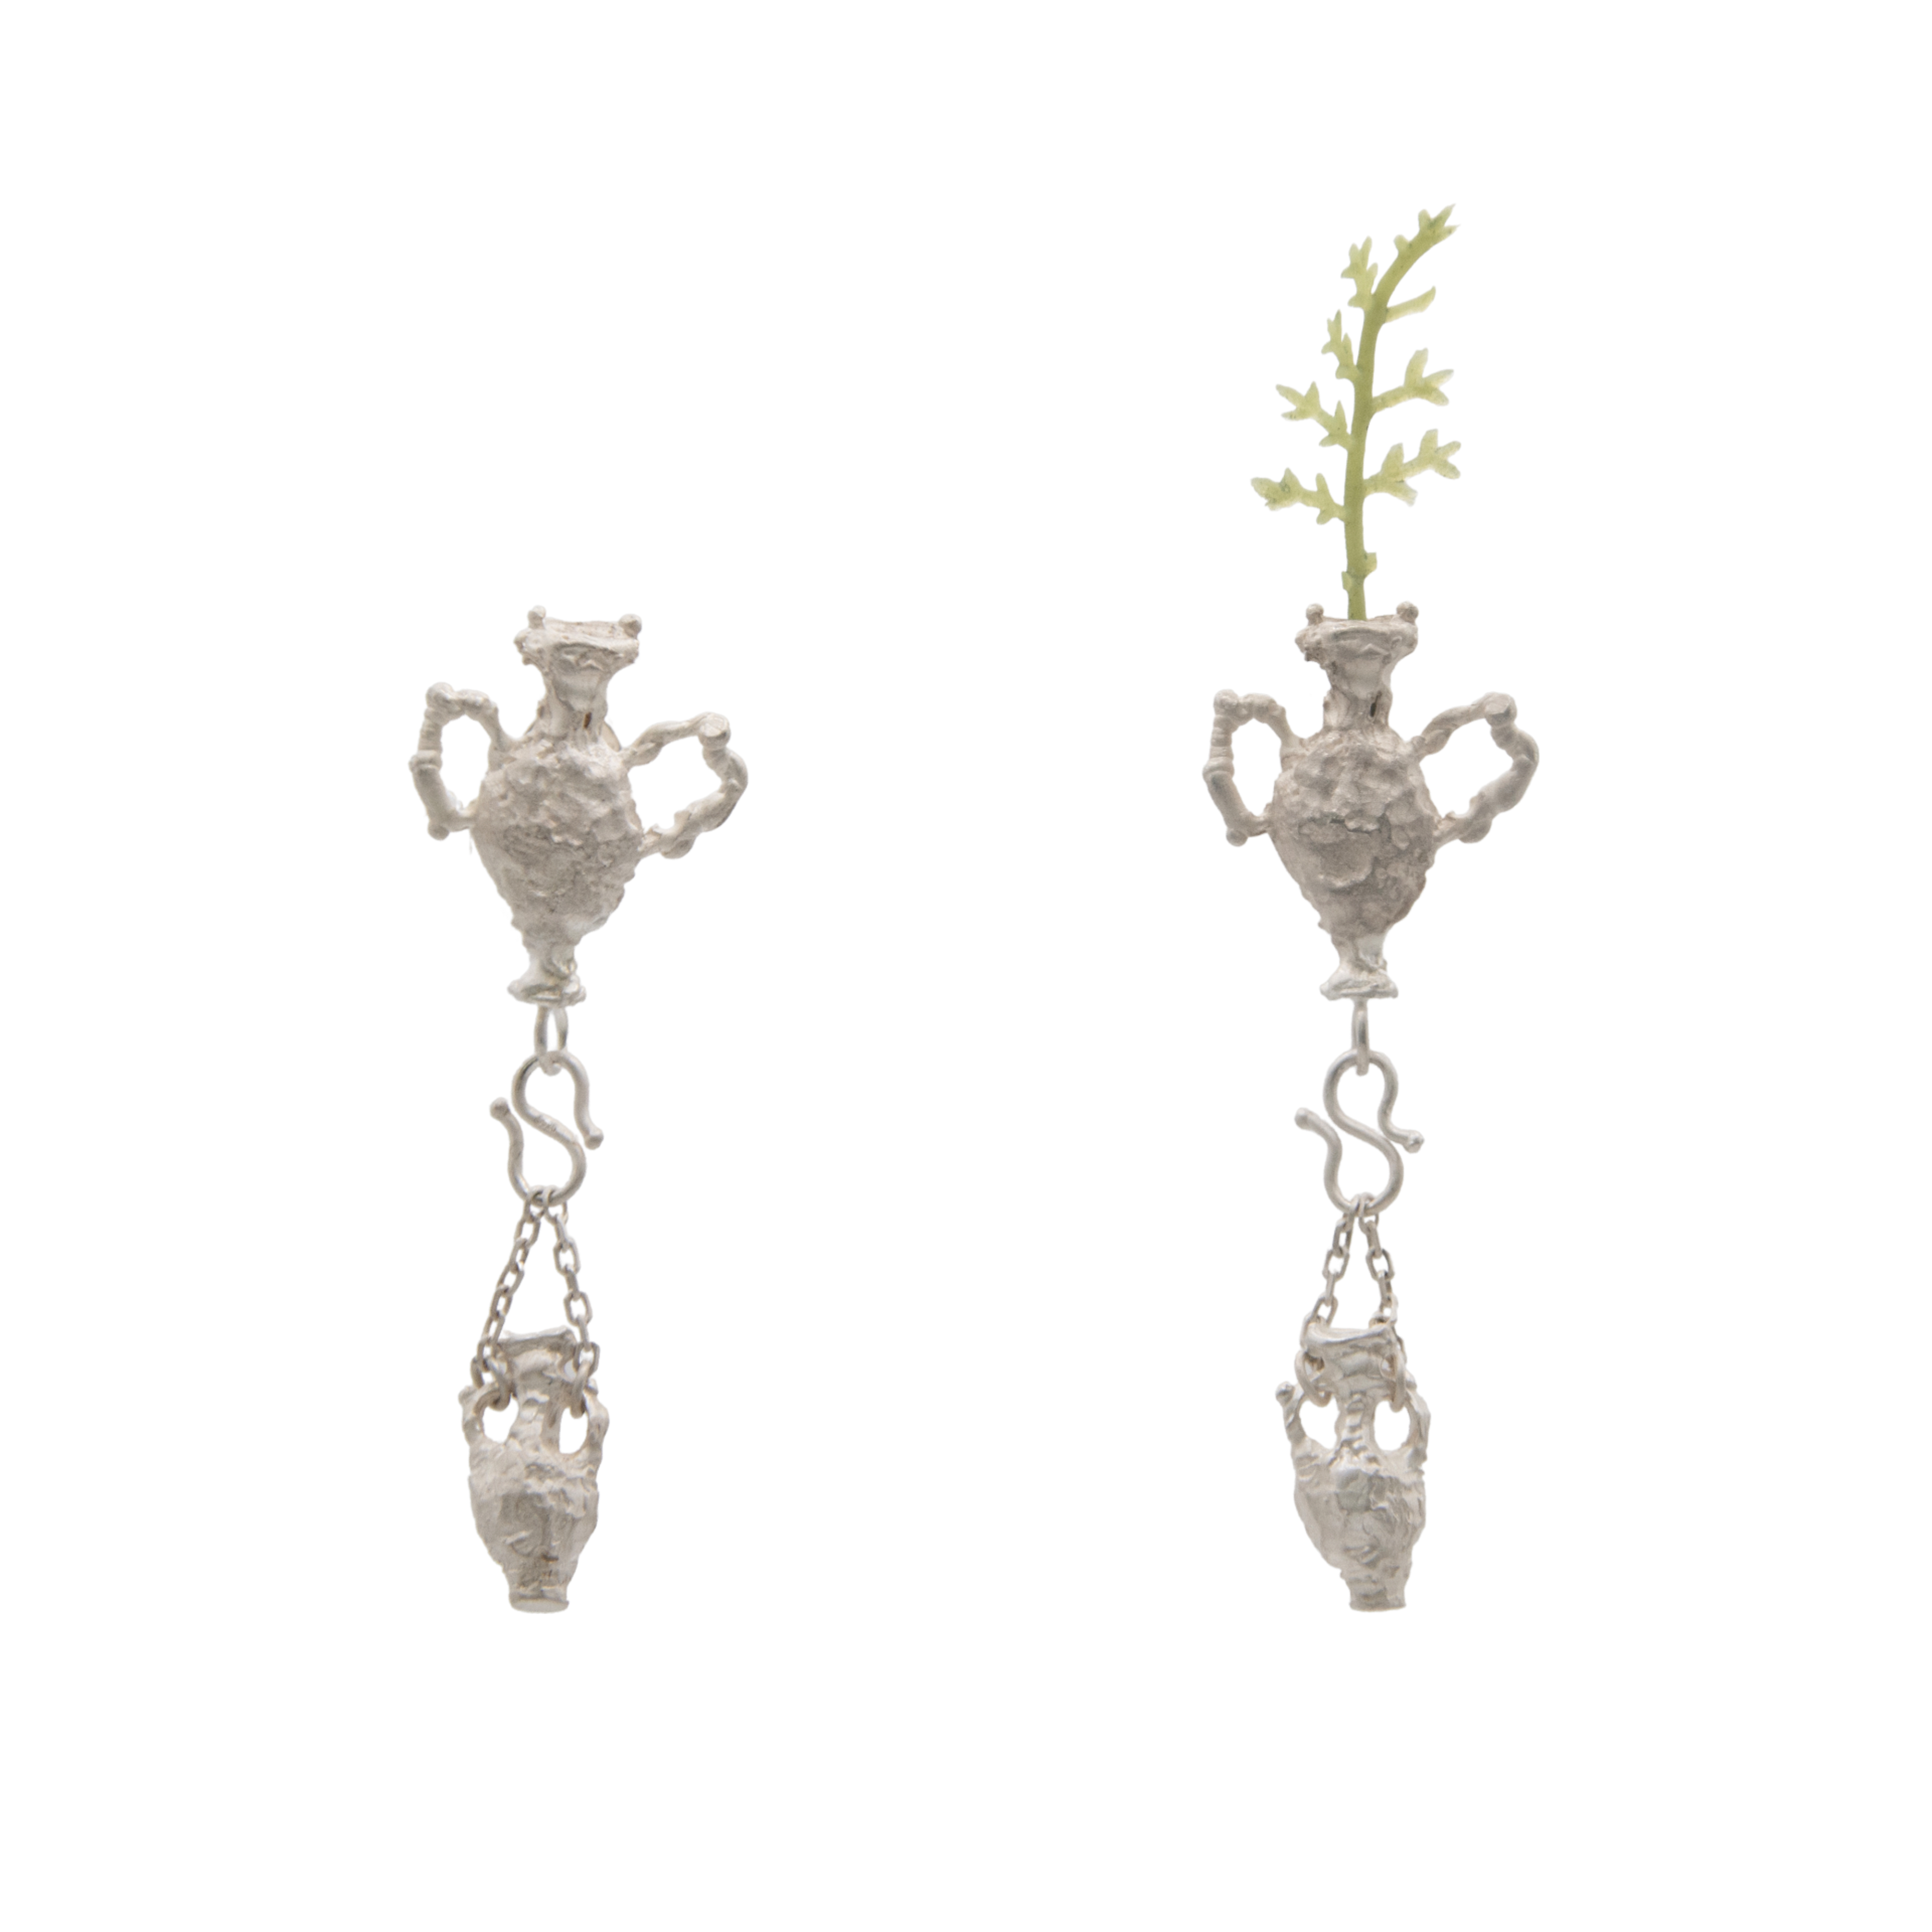 TWIN VASES EARRINGS (SILVER) - Hanying - ALSOLIKE